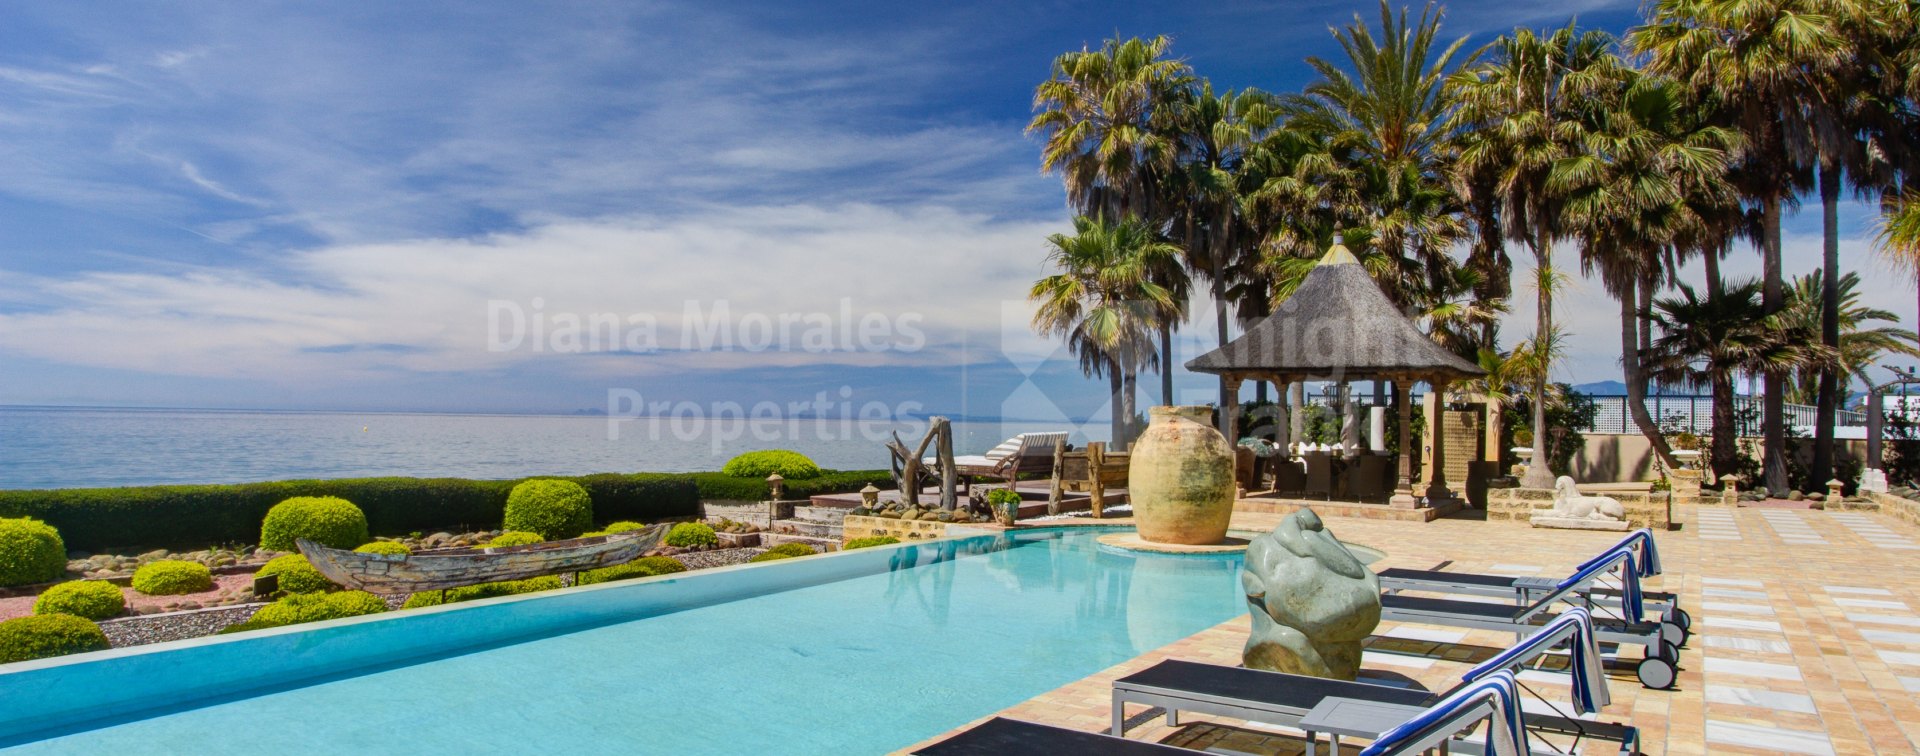 Los Monteros, Imposing first line beach villa in sought after location